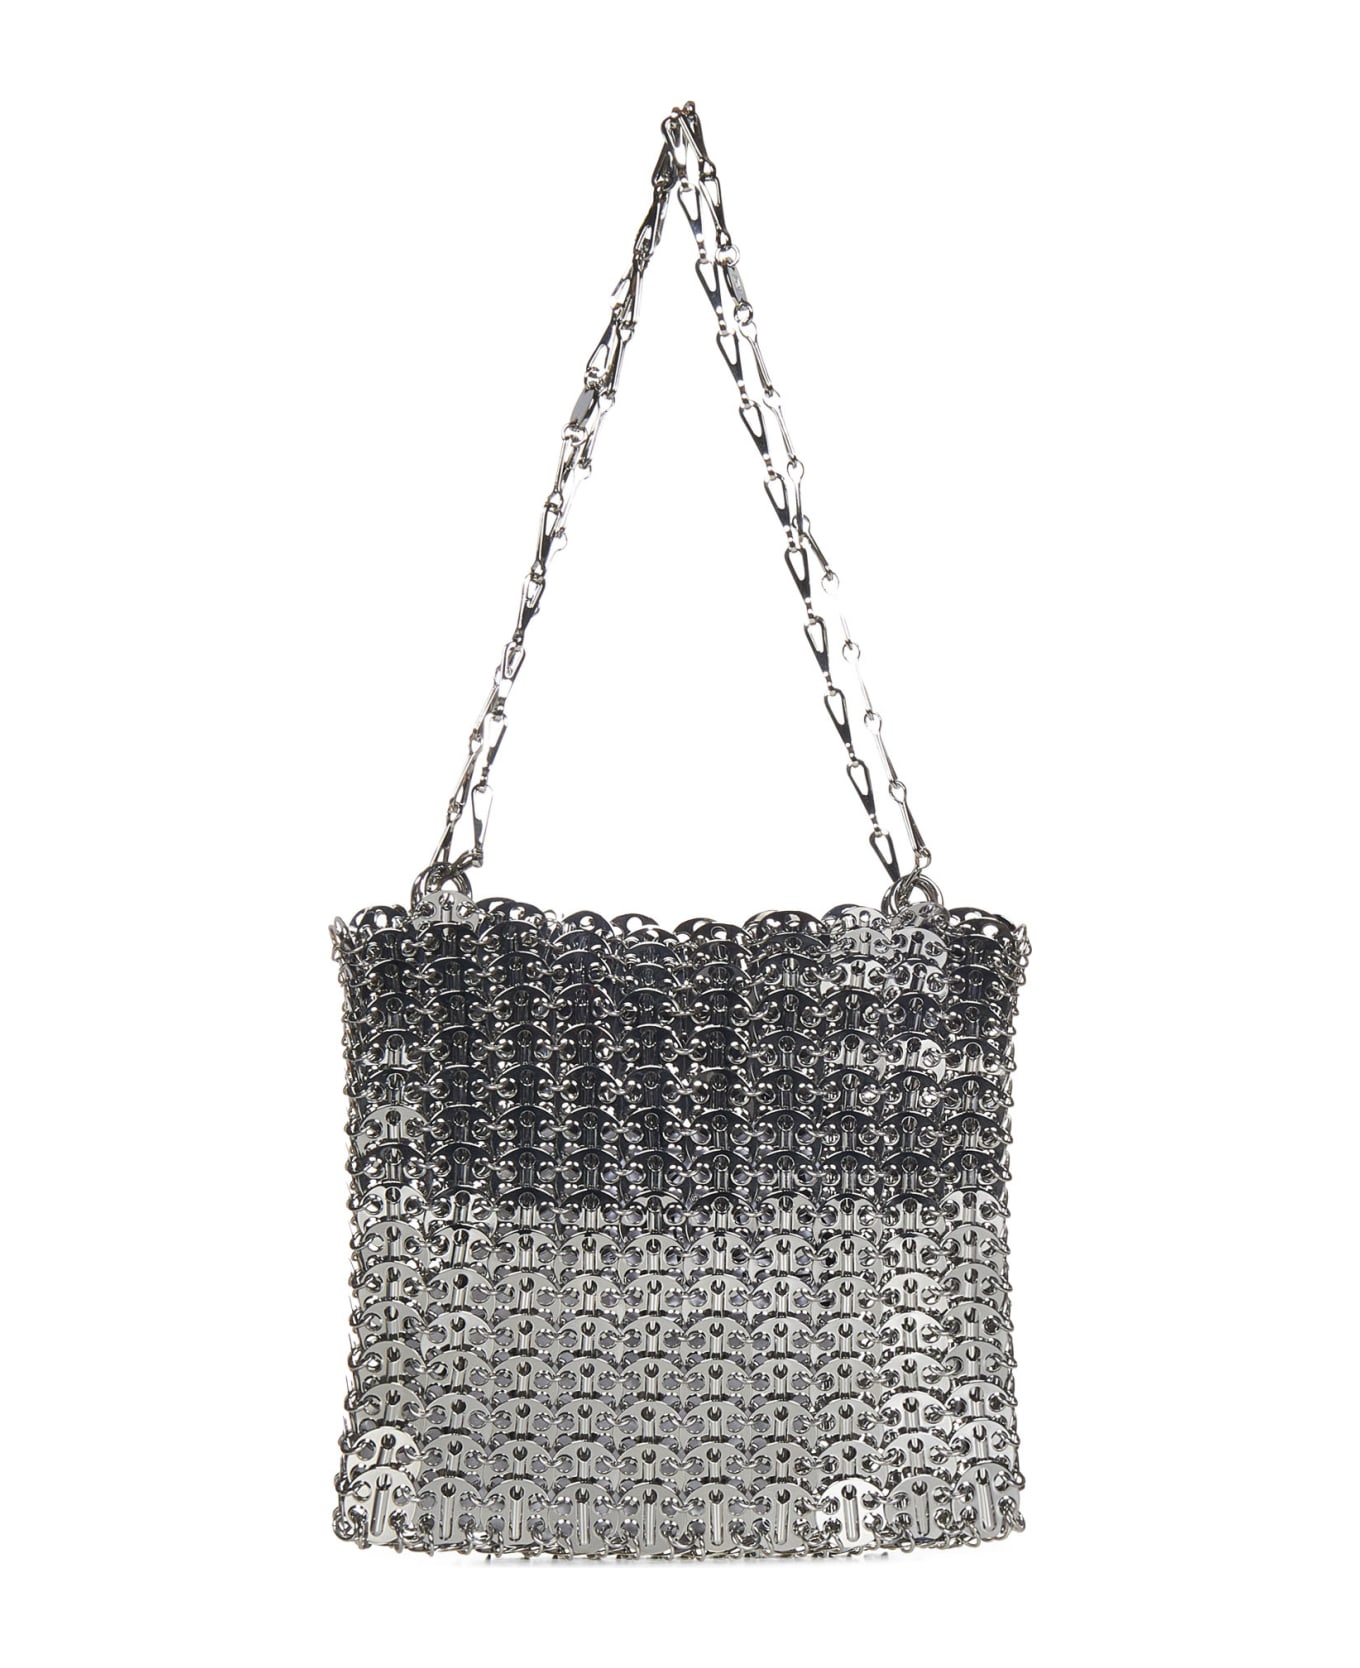 Paco Rabanne Paco Iconic Silver 1969 Shoulder Bag - Silver